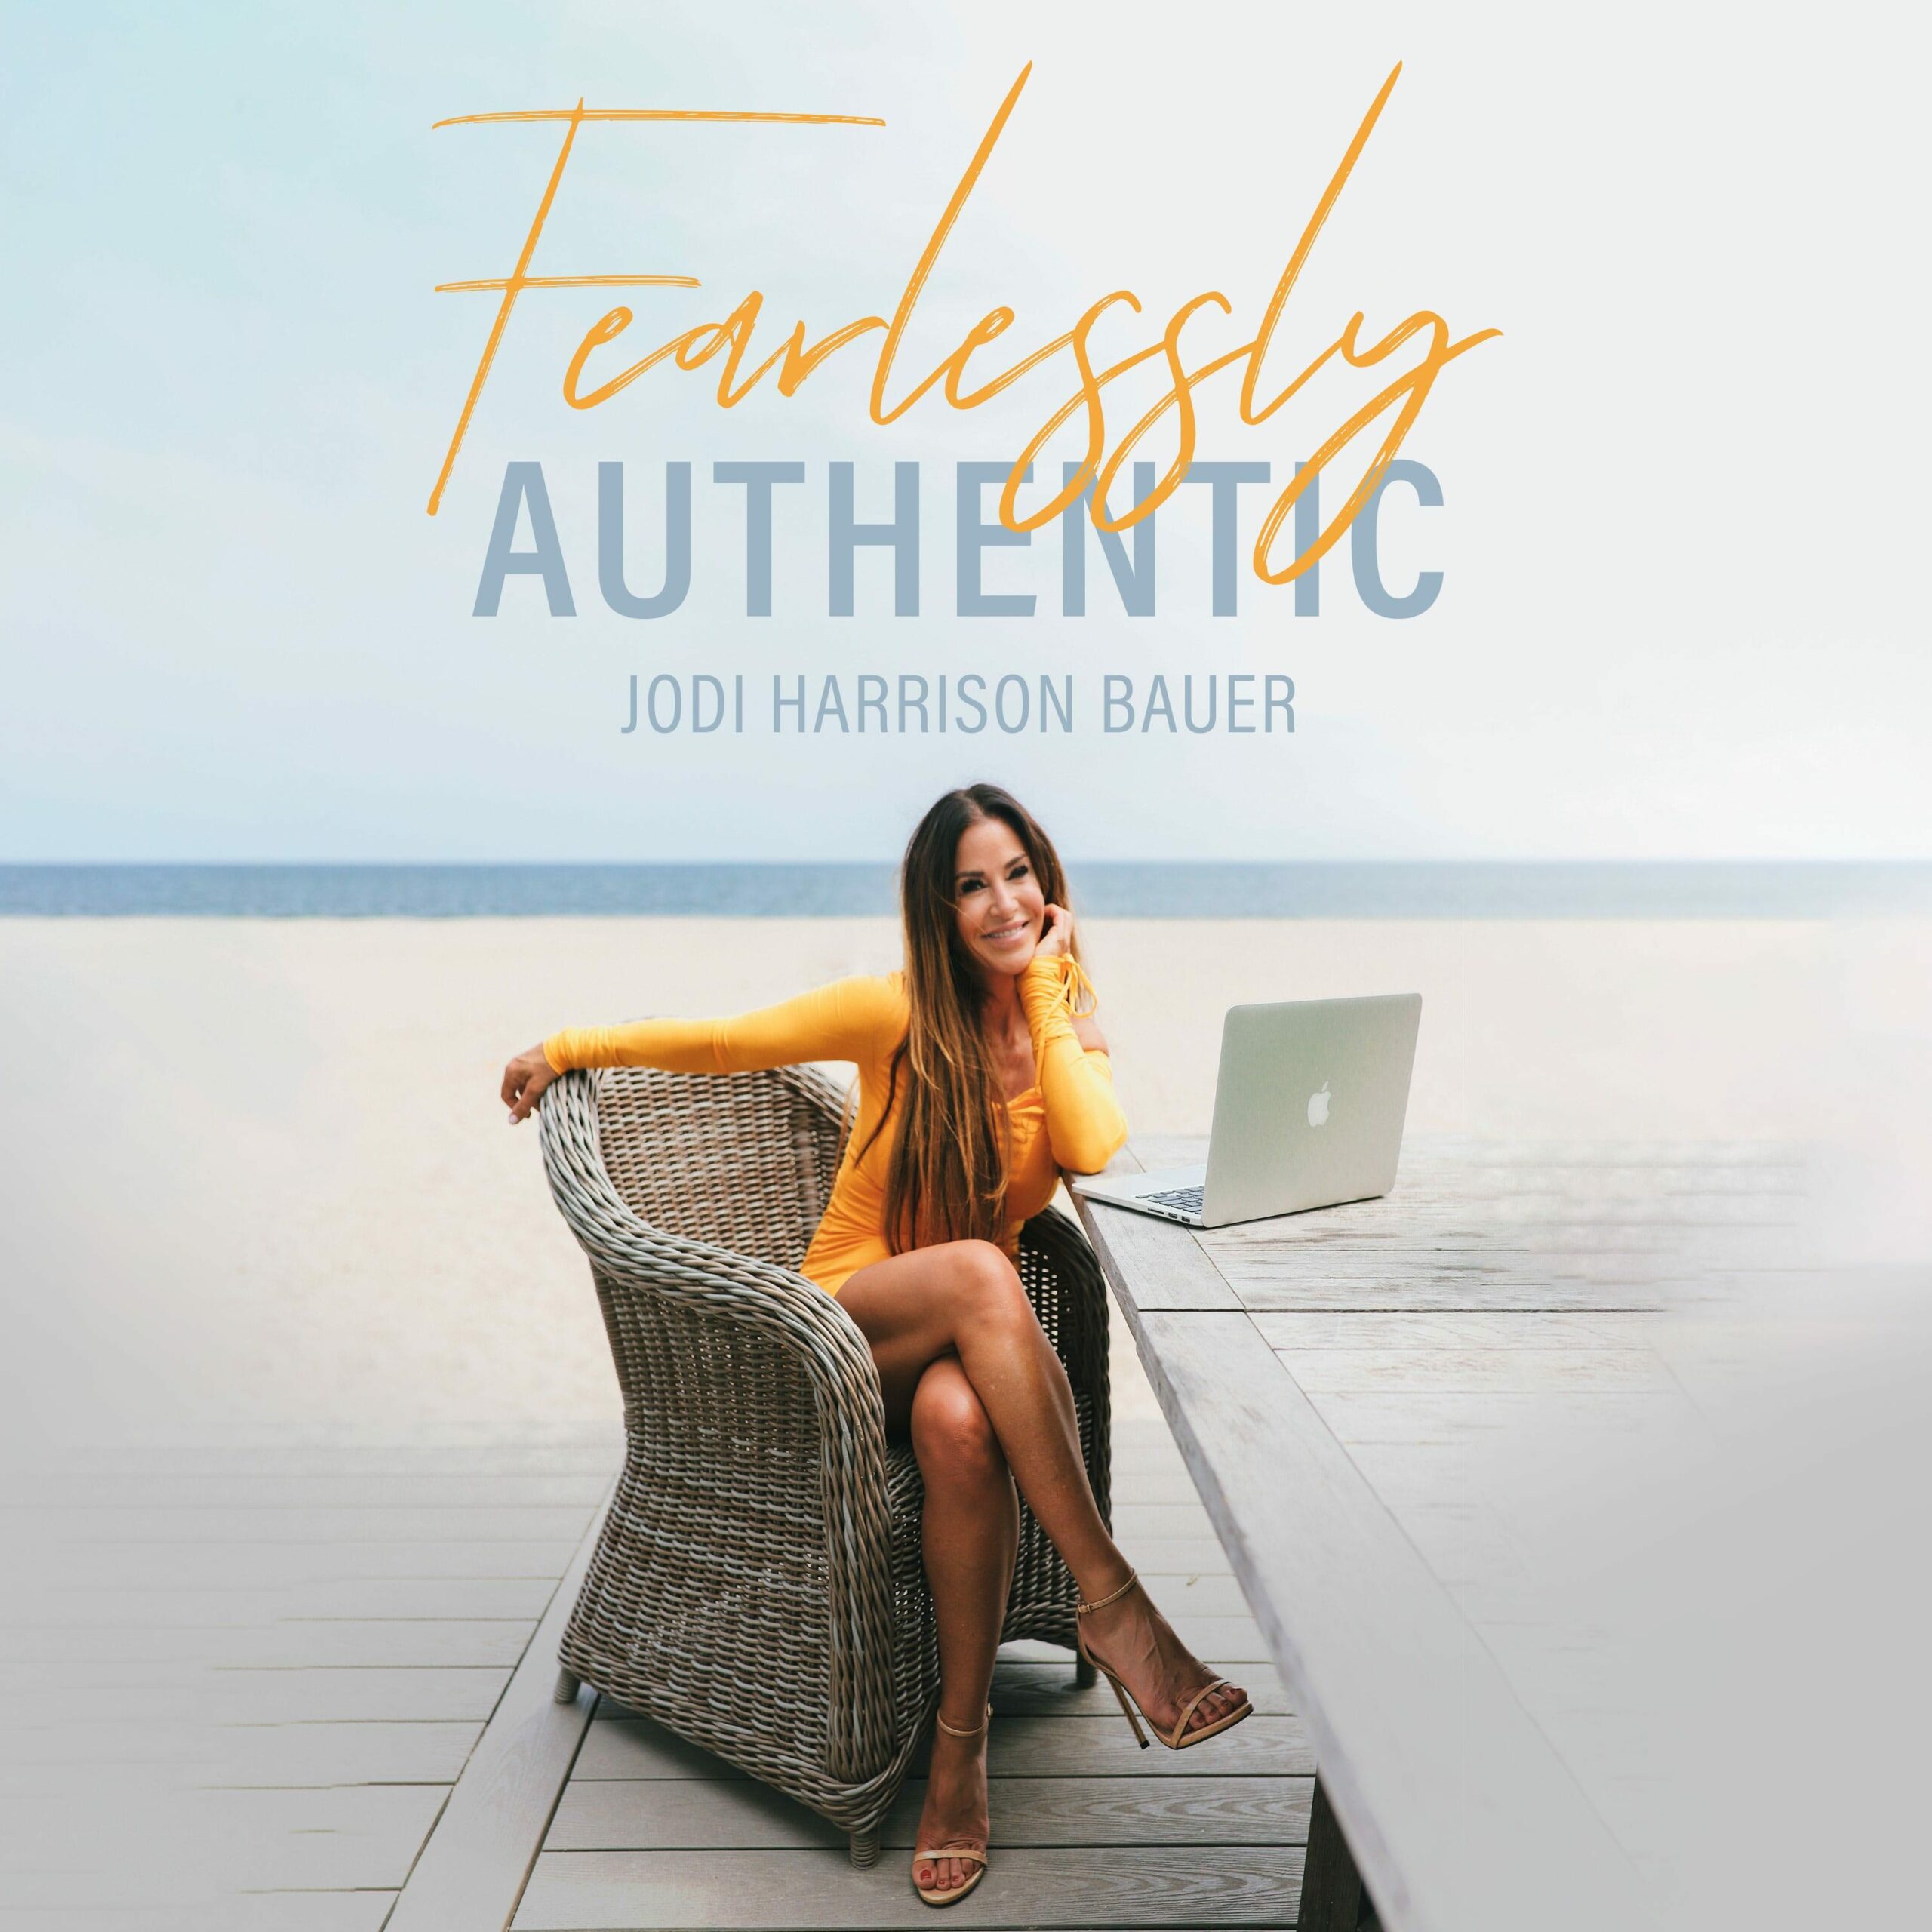 INTERVIEW | Get In The Practice Of Spending Just Minutes And Moments In The Negativity, Rather Than Hours, Days, Weeks, Months, or Years on The Fearlessly Authentic Podcast